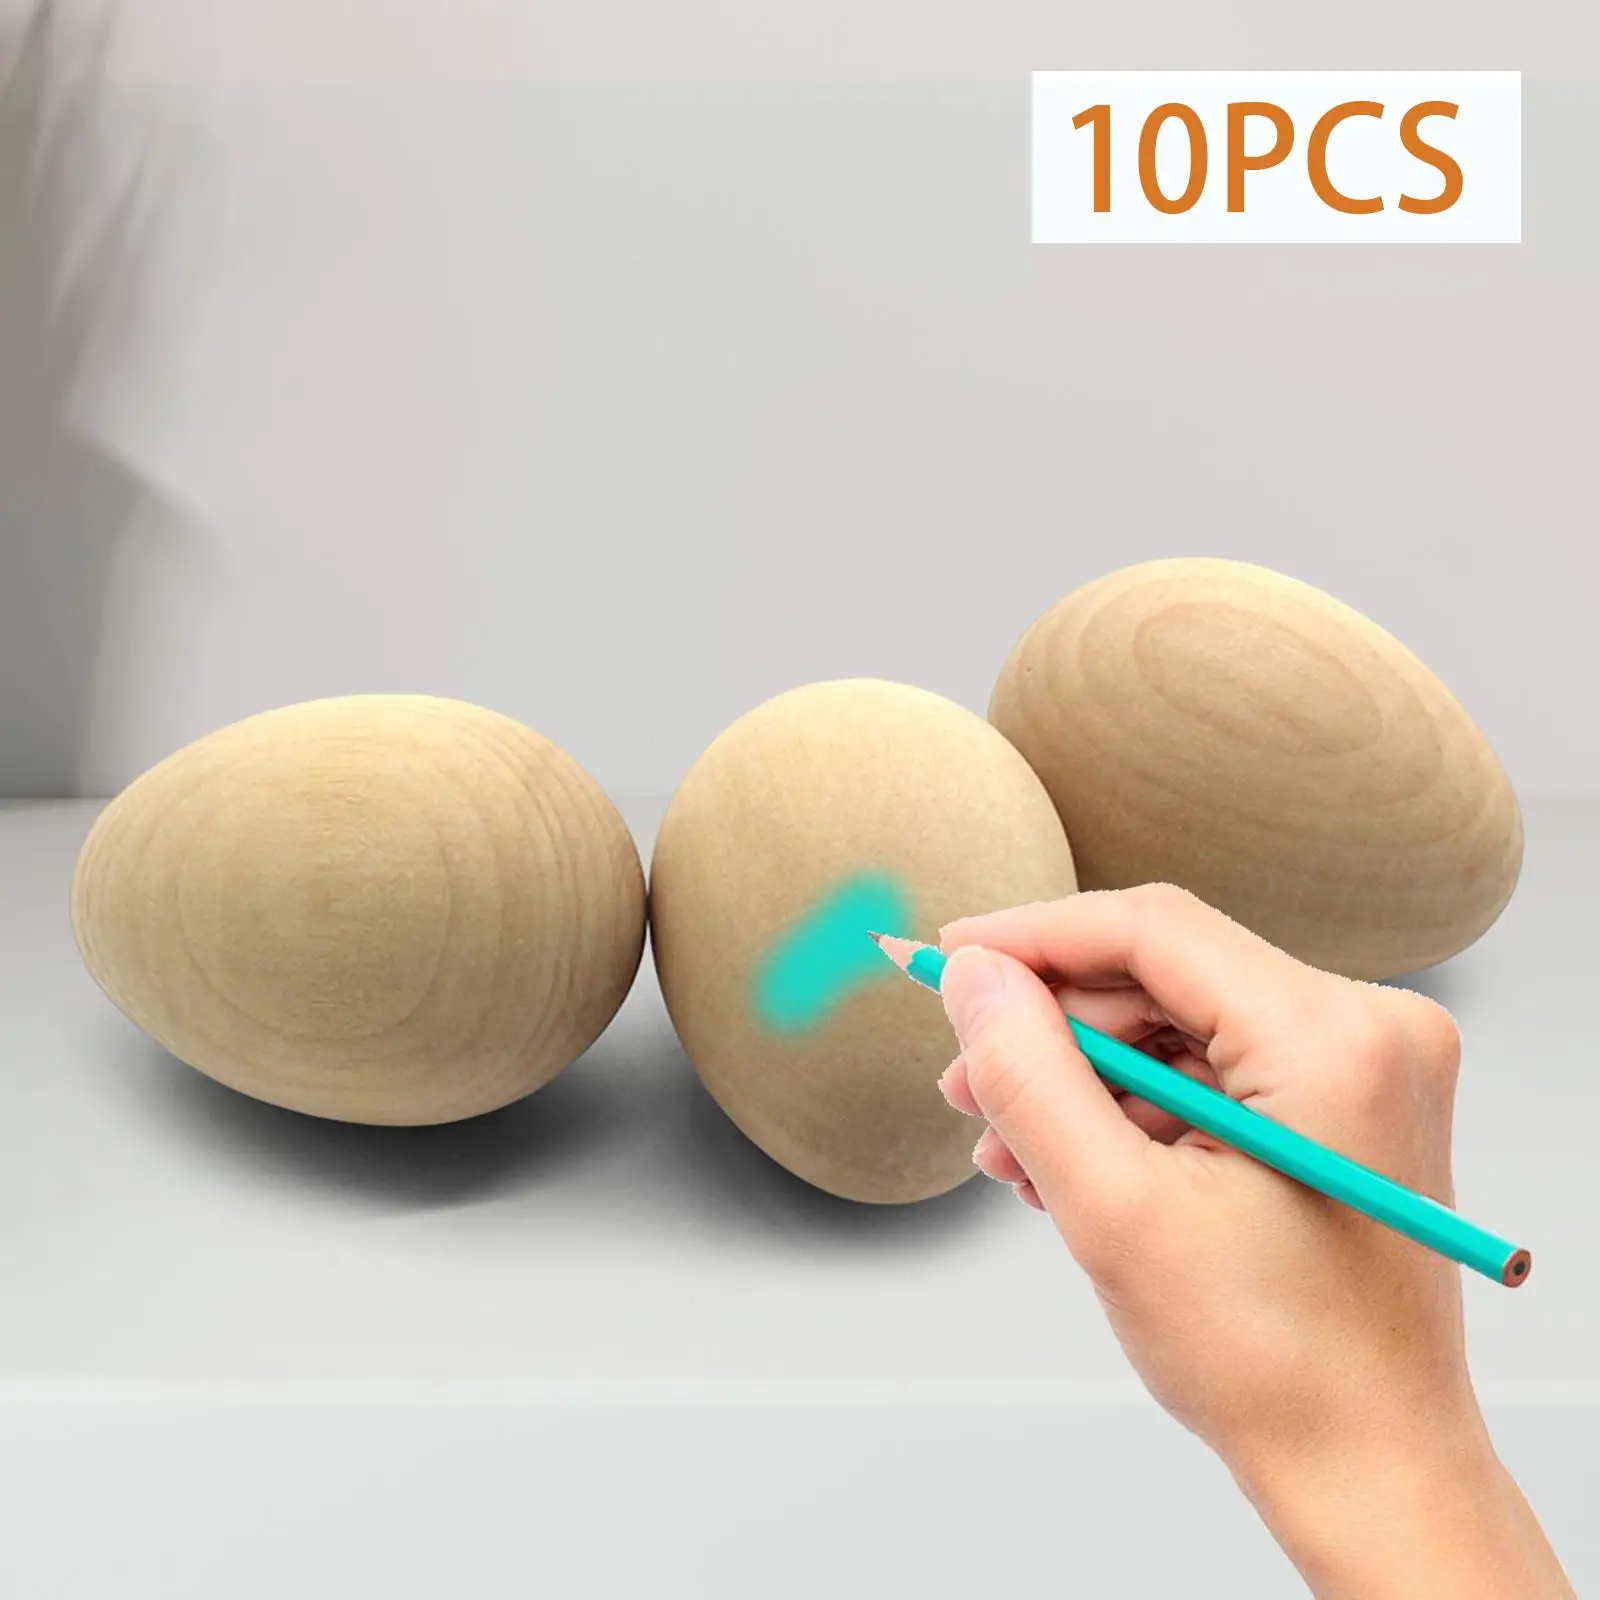 10x Smooth Wooden Blank Eggs Manual Graffiti Fake Eggs DIY Wood Easter Egg for DIY Crafts